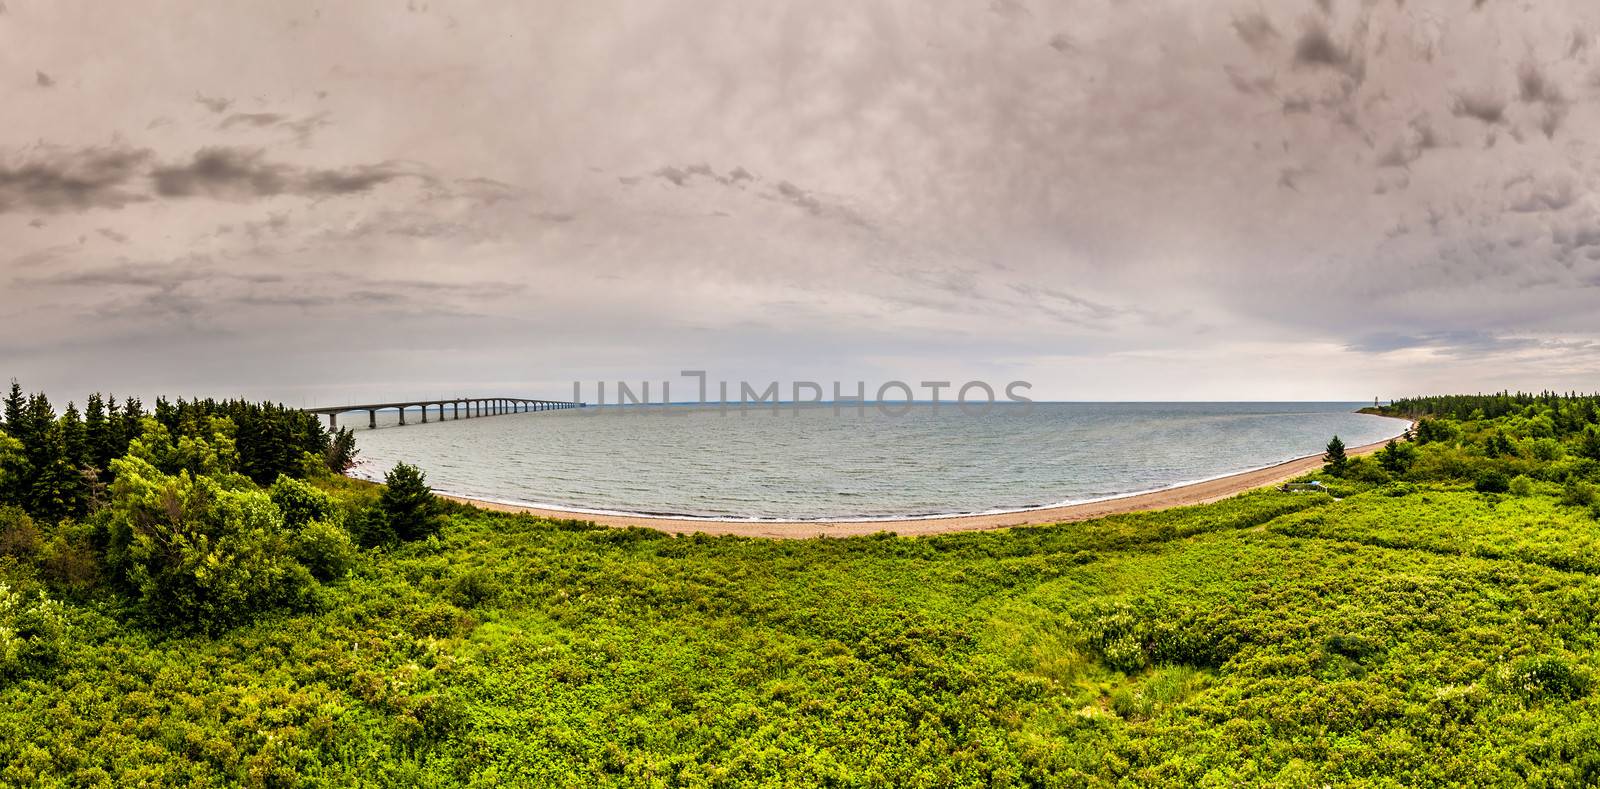 Panoramic view of the Confederation Bridge and the surrounding beach in New Brunswick Canada